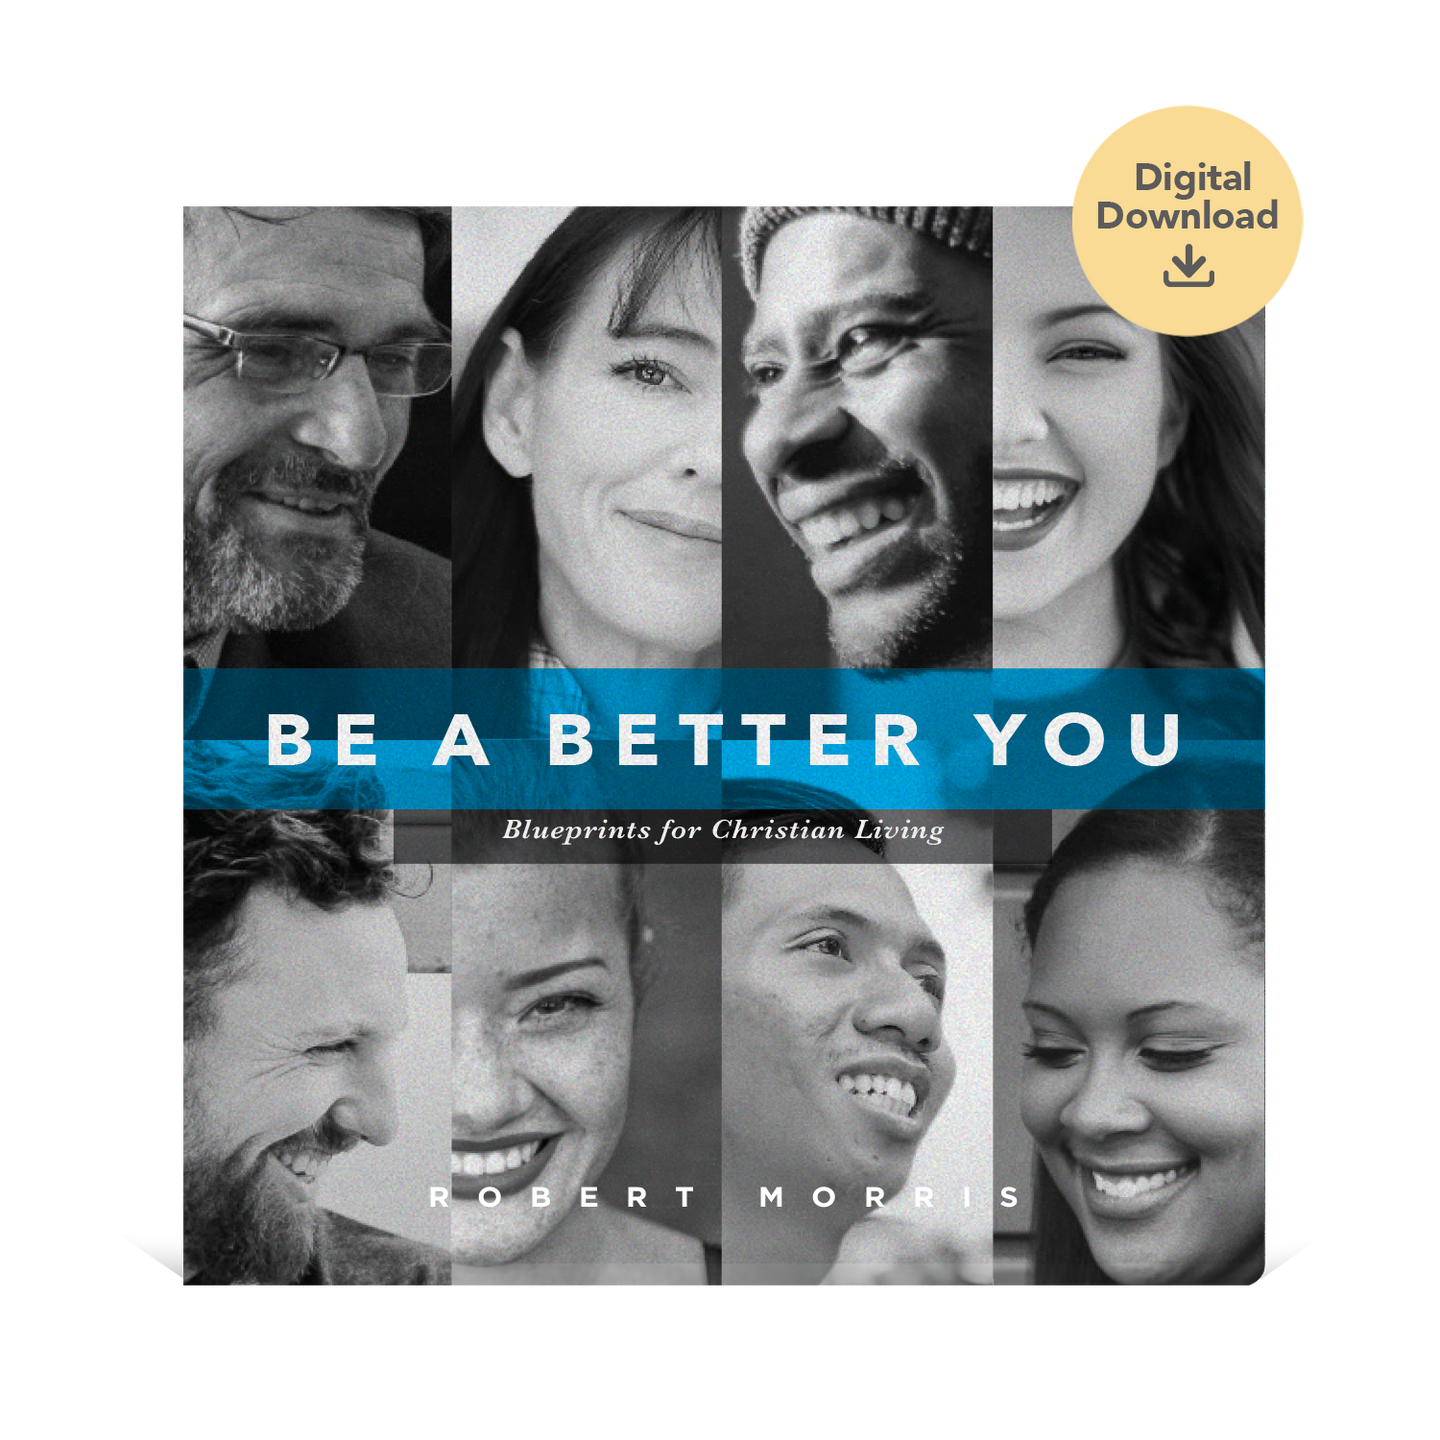 Be a Better You Video Digital Download